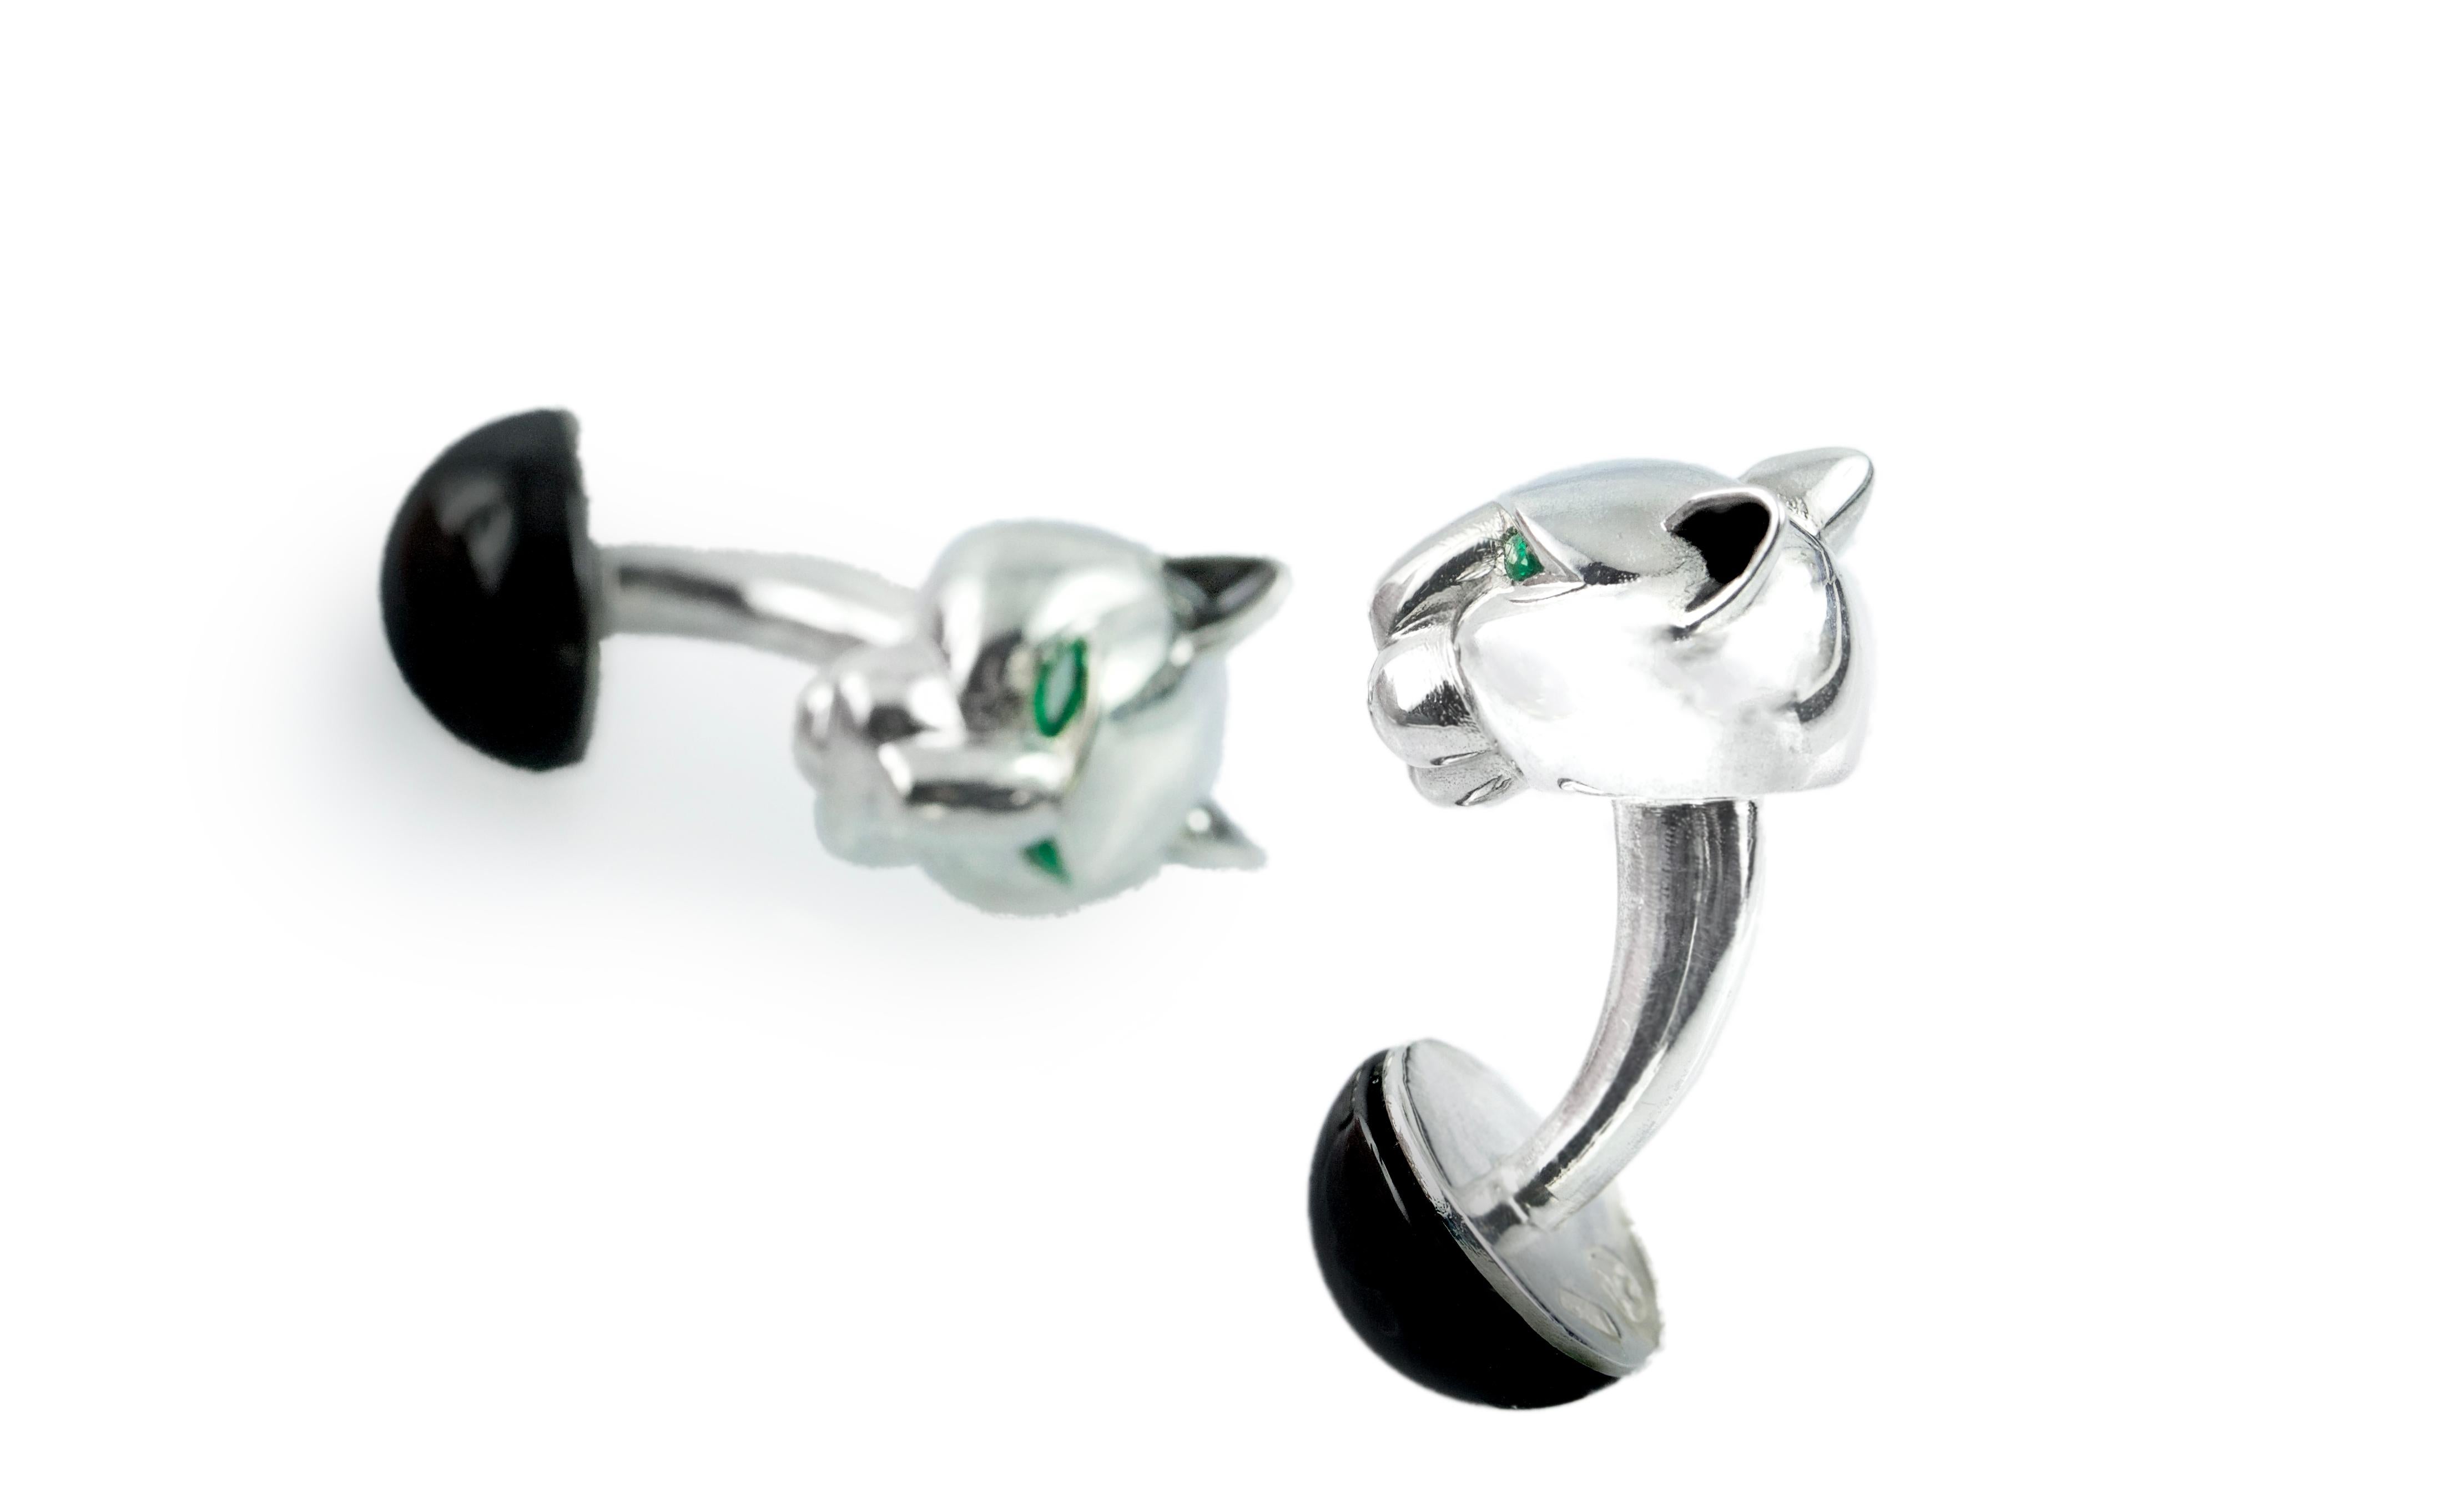 Silver 925 panther cufflinks embellished by emeralds on his eyes and a half sphere in onyx , ears with black enamel.